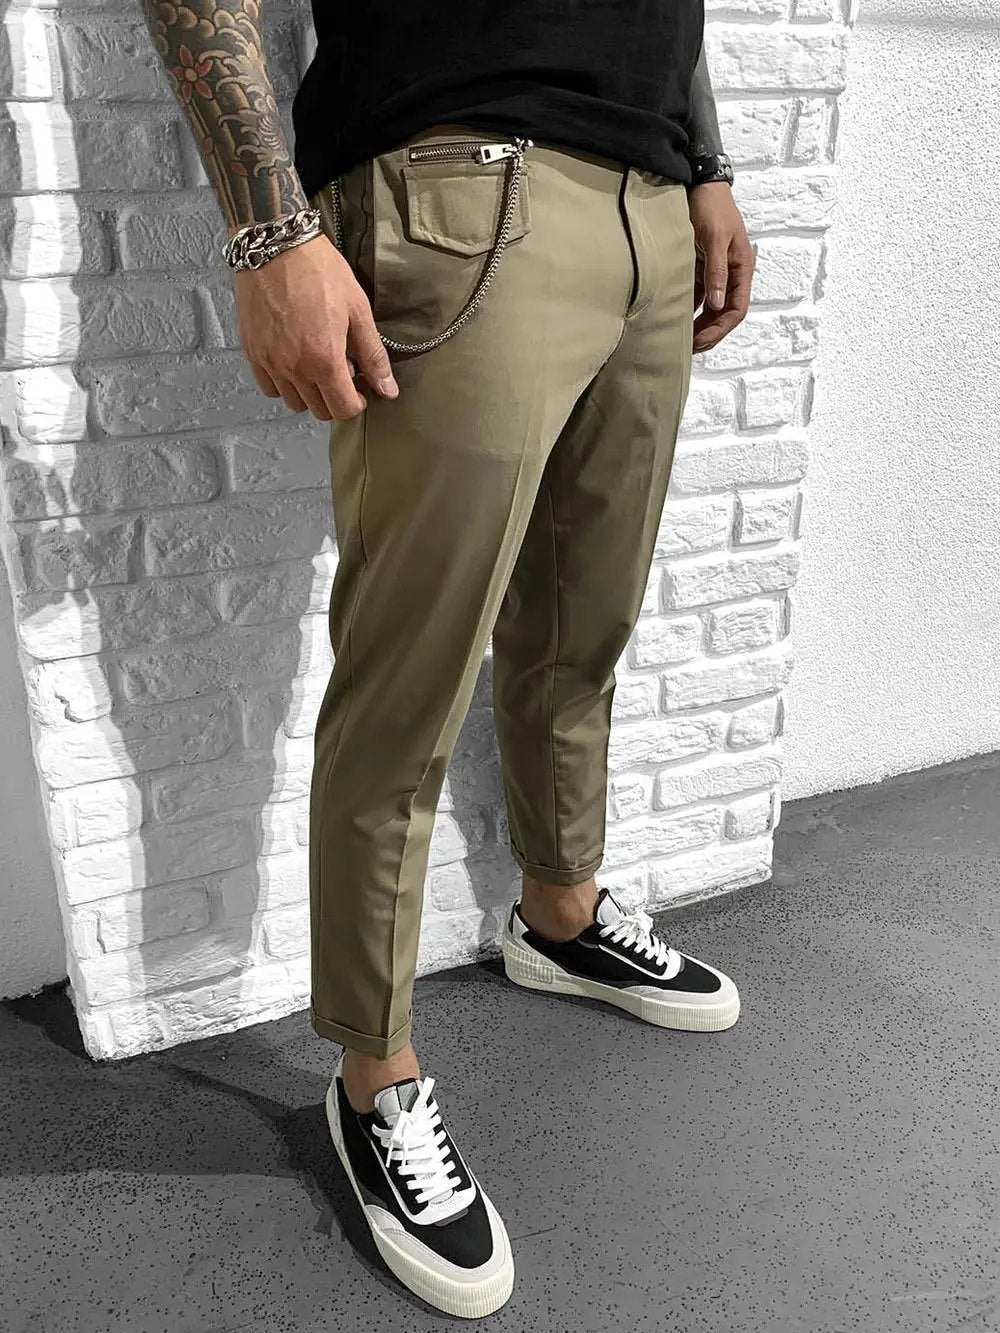 A man wearing Gentleman's Roll Up pants is standing next to a brick wall.